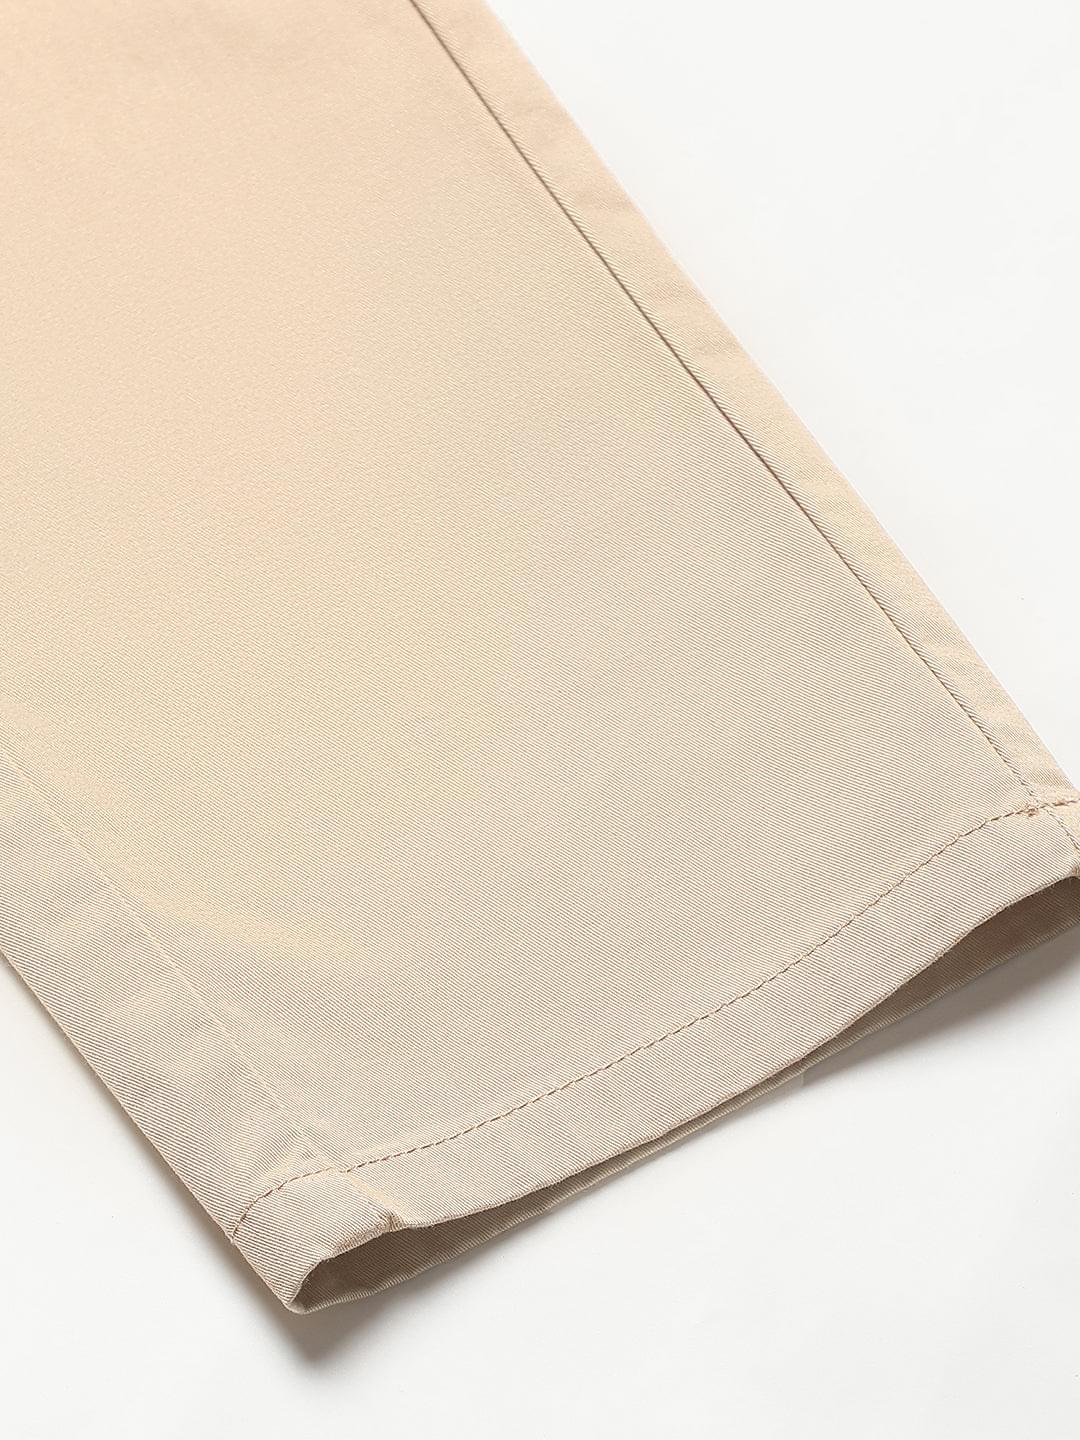 Organic Cotton Stretch Chino in Beige- Comfort Fit